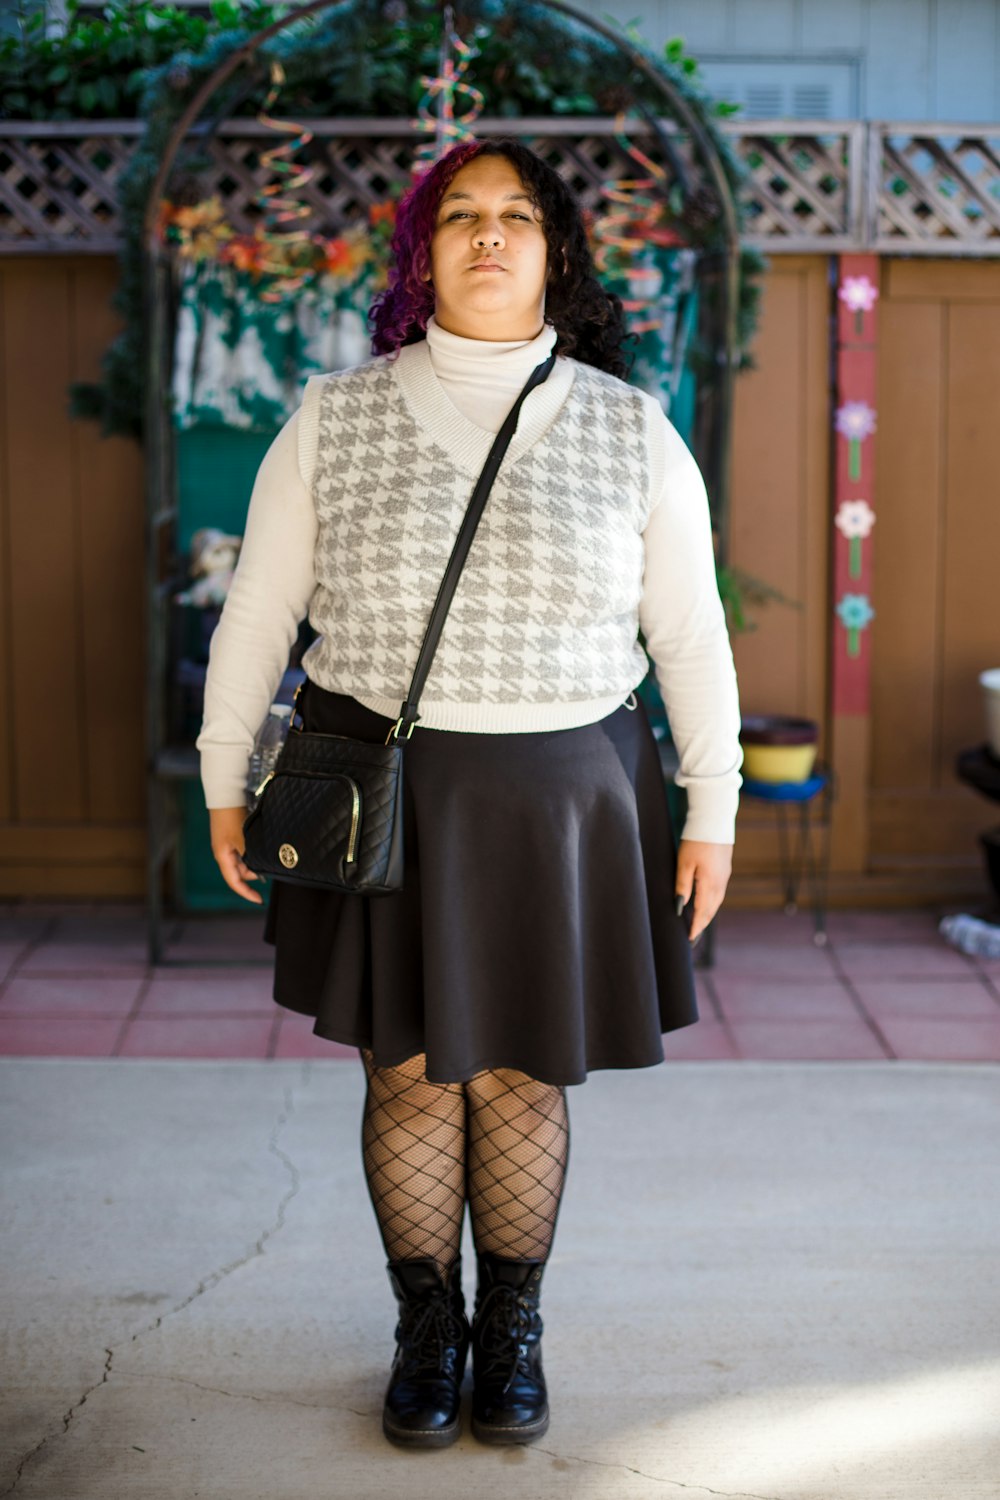 a woman in a white sweater and black skirt